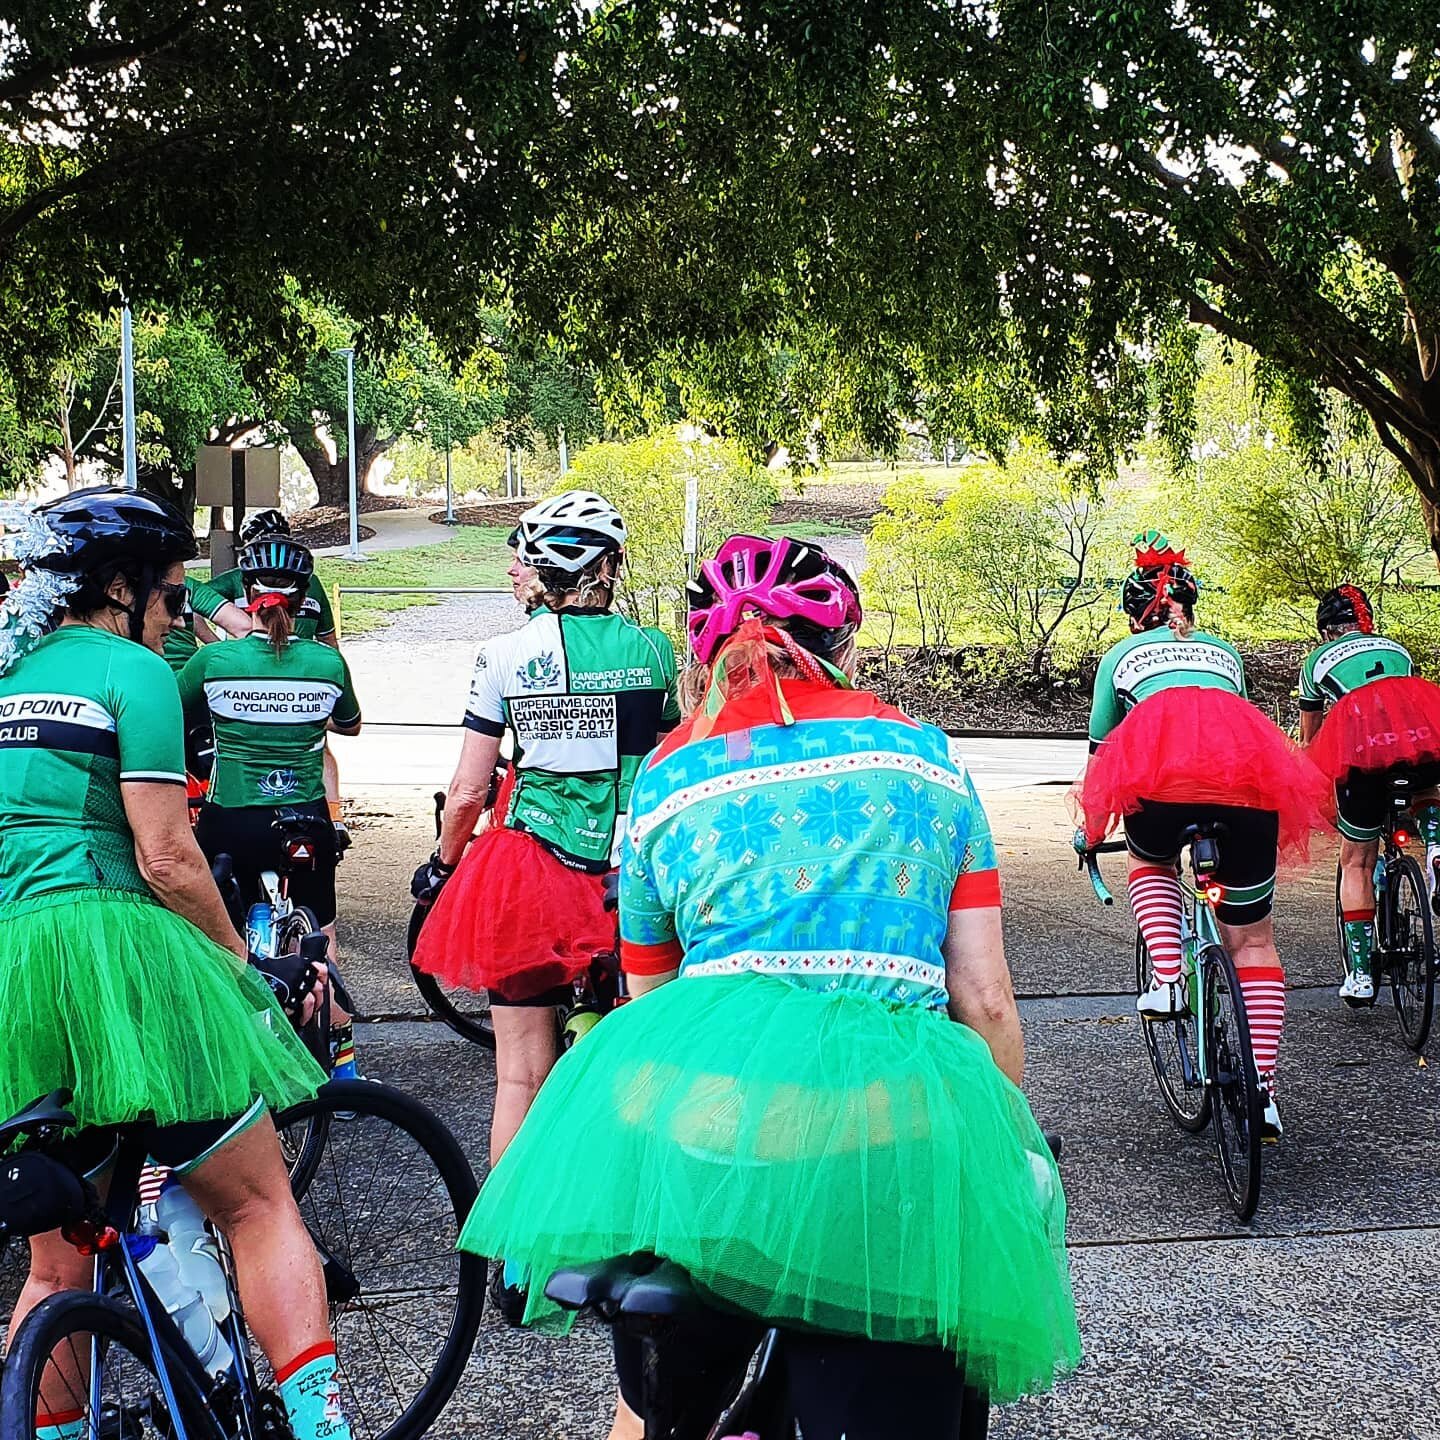 A fabulous morning for a KPCC FriYay Christmas ride with everyone looking very festive! So wonderful to see everyone getting into the spirit of Christmas! #merrychristmas #greenwhiteblack #clublife #kangaroopointcc #championsystem #christmas